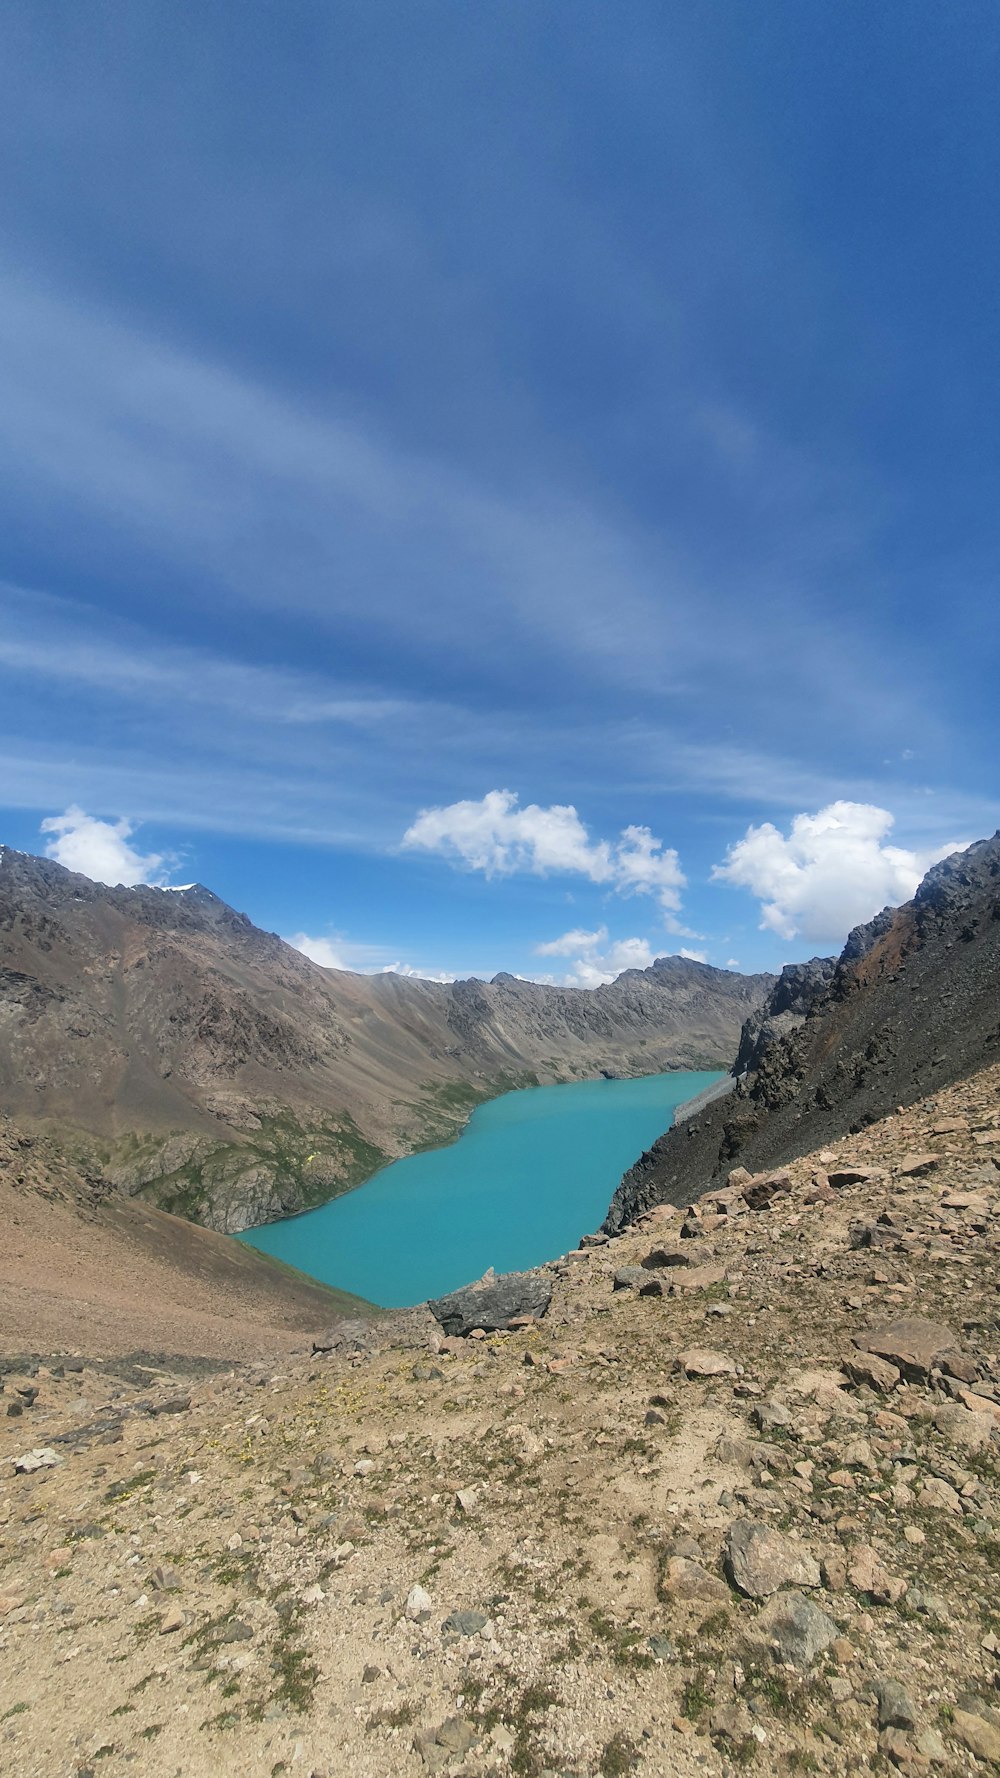 a blue lake in the middle of a mountain range